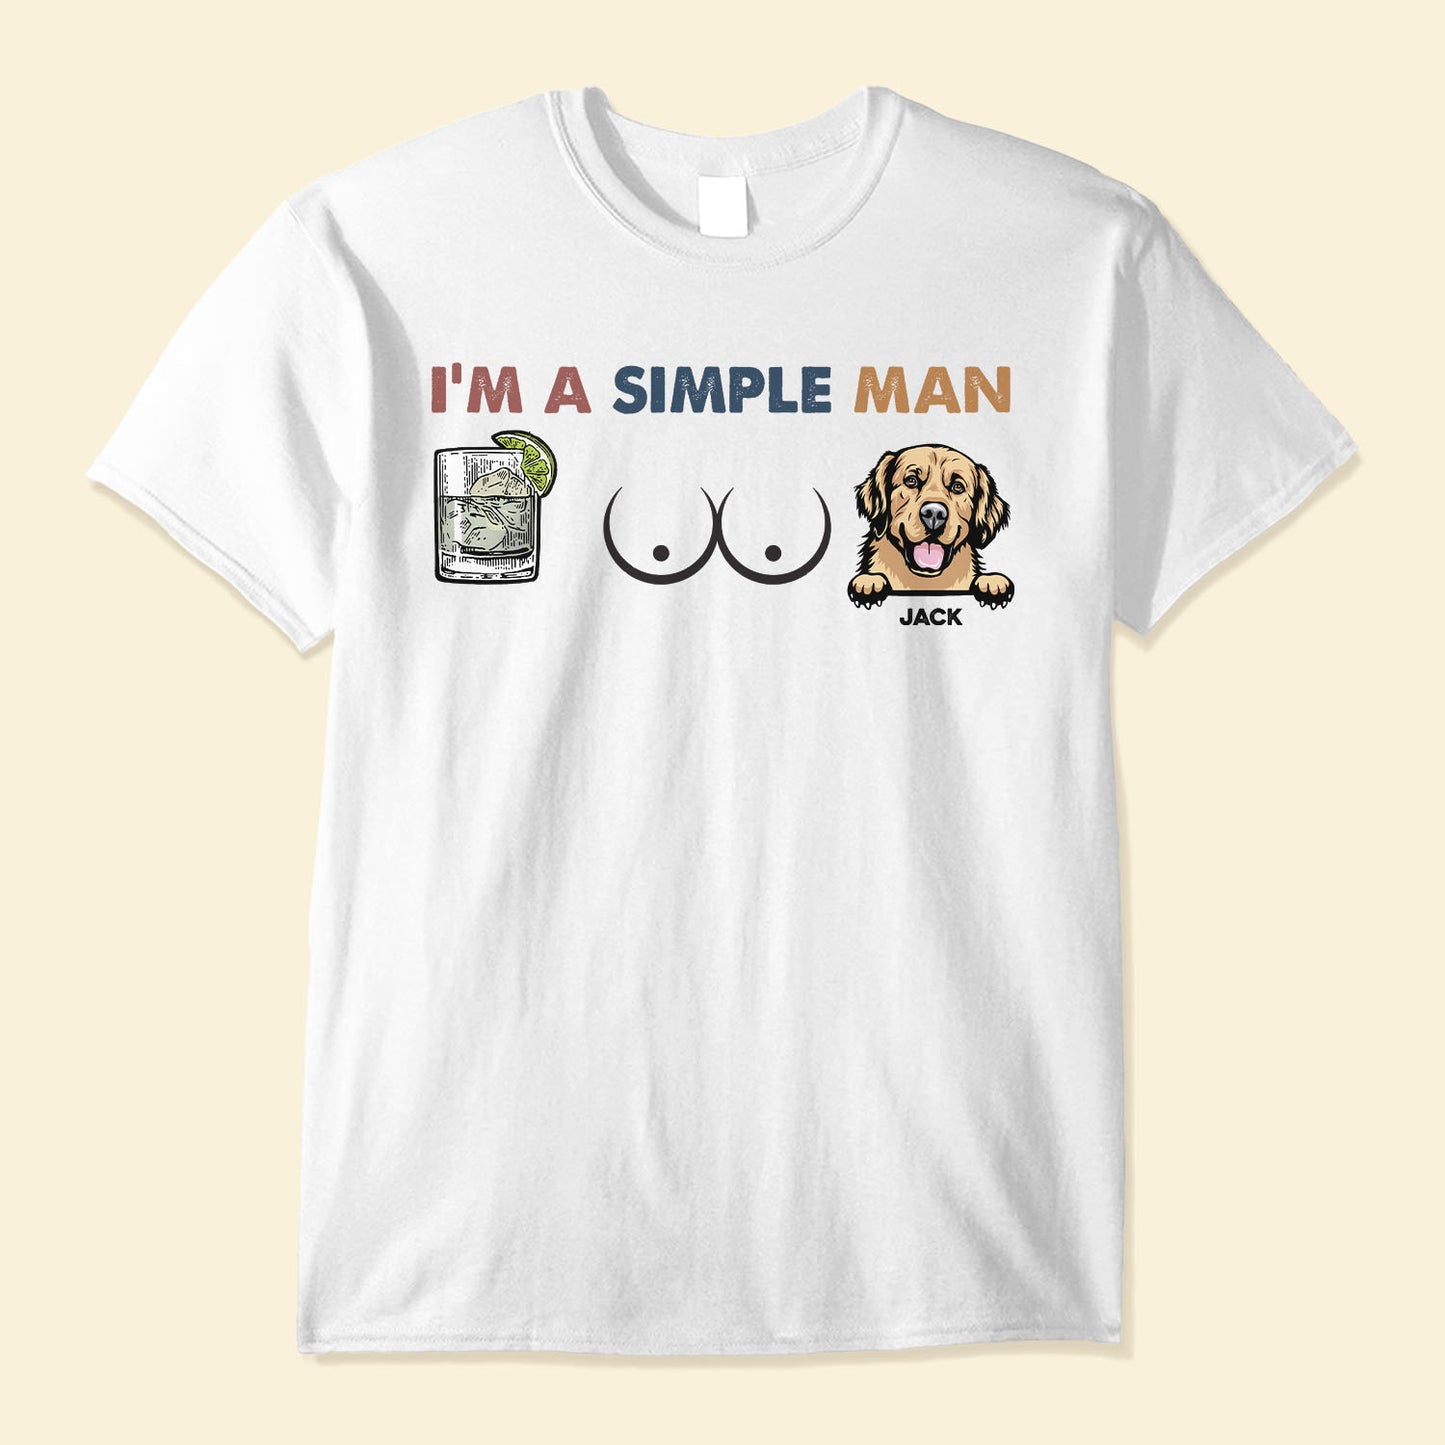 I Am A Simple Man - Personalized Shirt